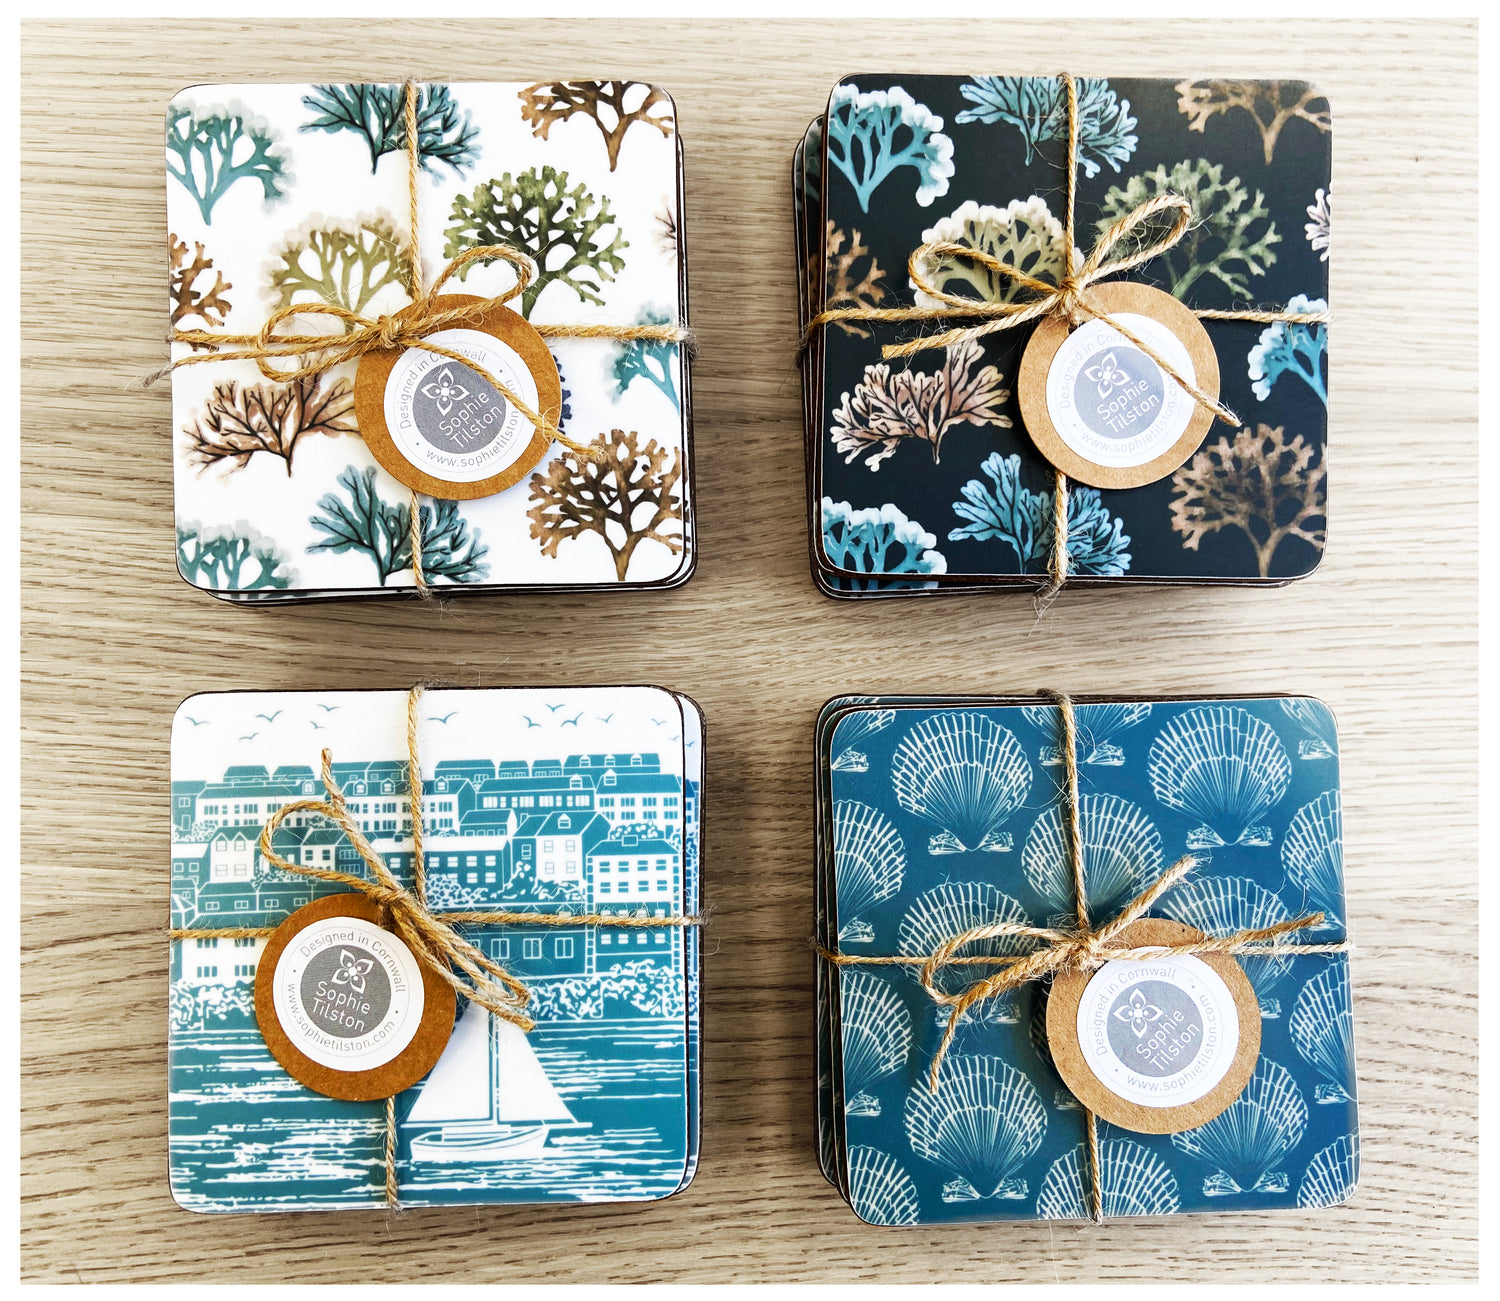 Seaweed, Falmouth & Shell Square coaster set - Sophie Tilston